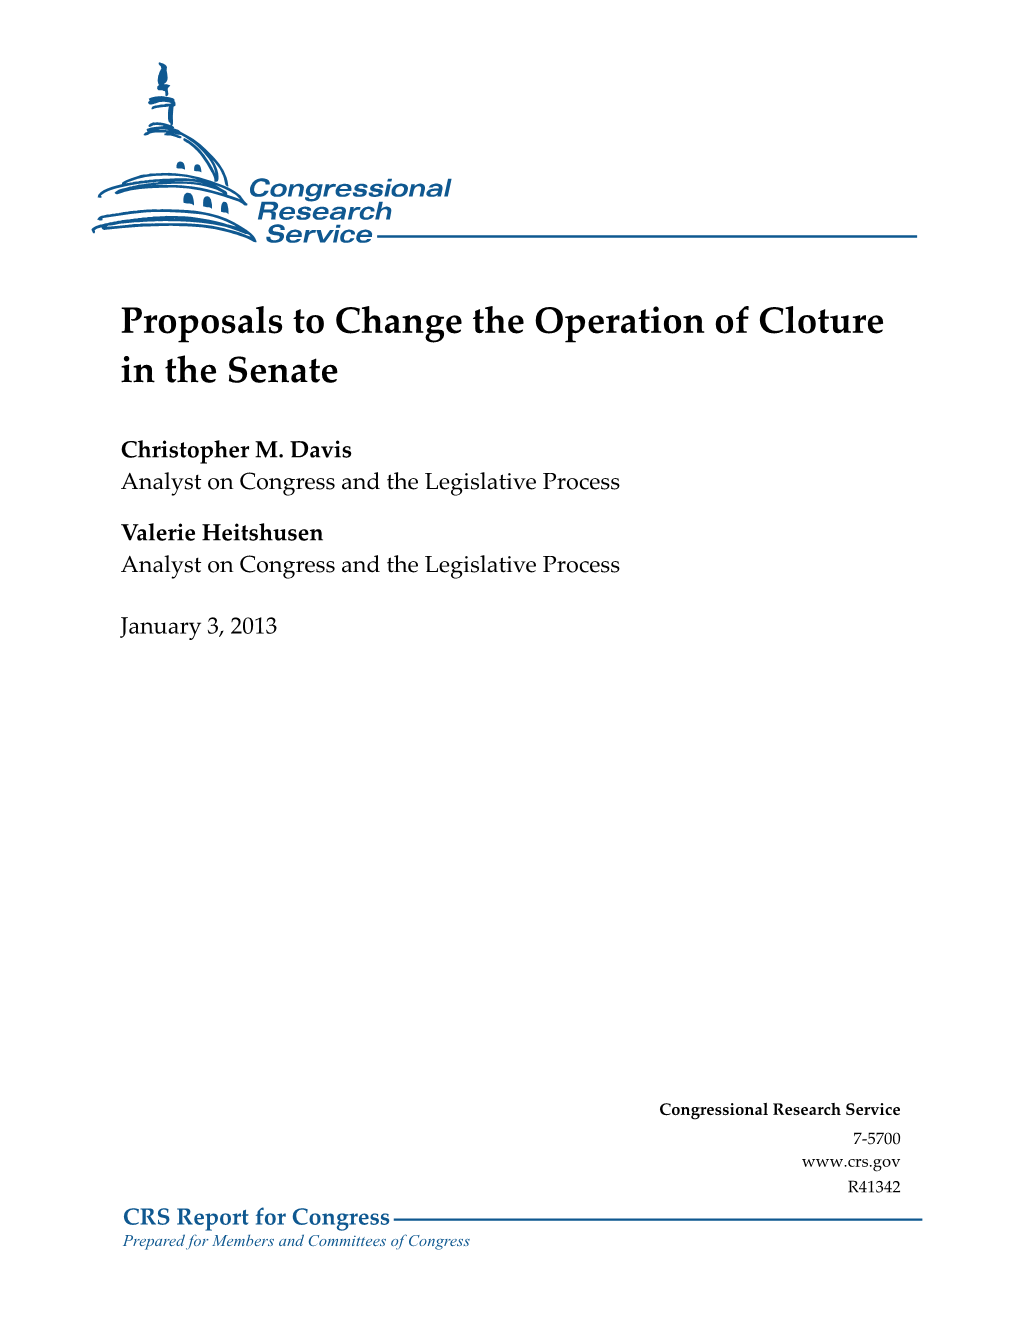 Proposals to Change the Operation of Cloture in the Senate